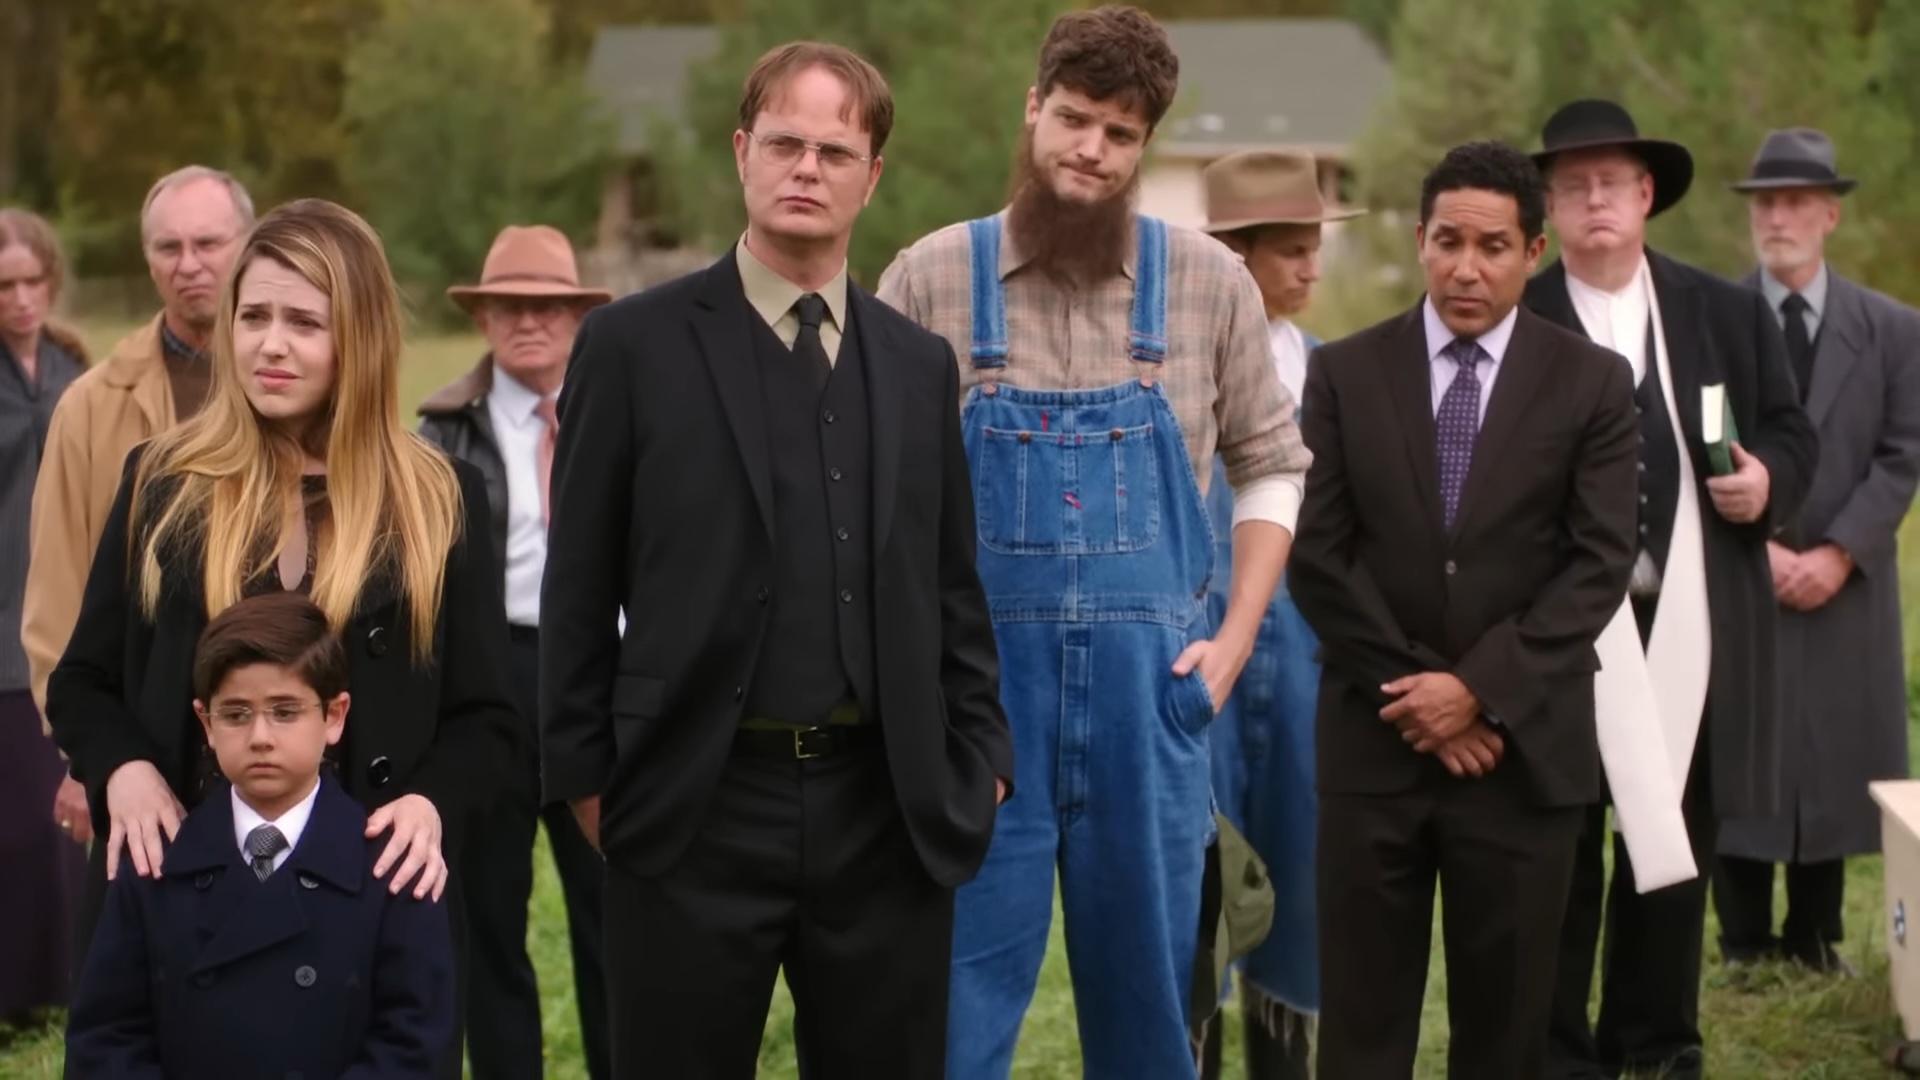 Oscar, Dwight and the Schrute family at a funeral in "The Office."